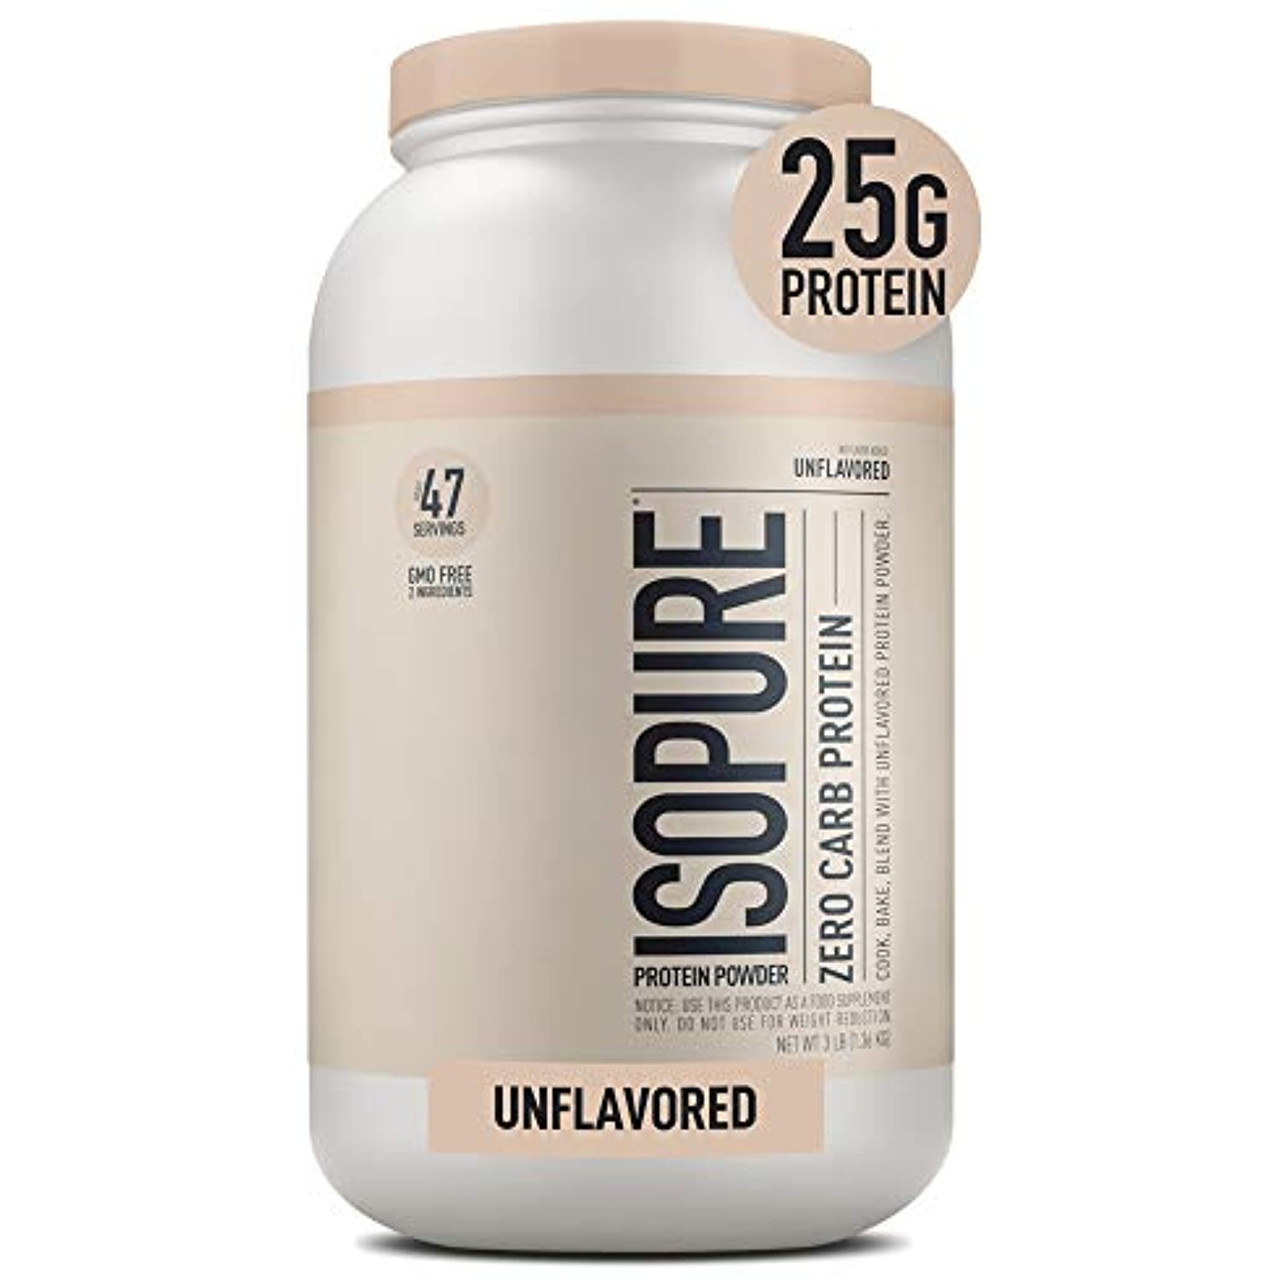 Isopure Zero Carb Unflavored 25g Protein, 100% Whey Protein Isolate ...